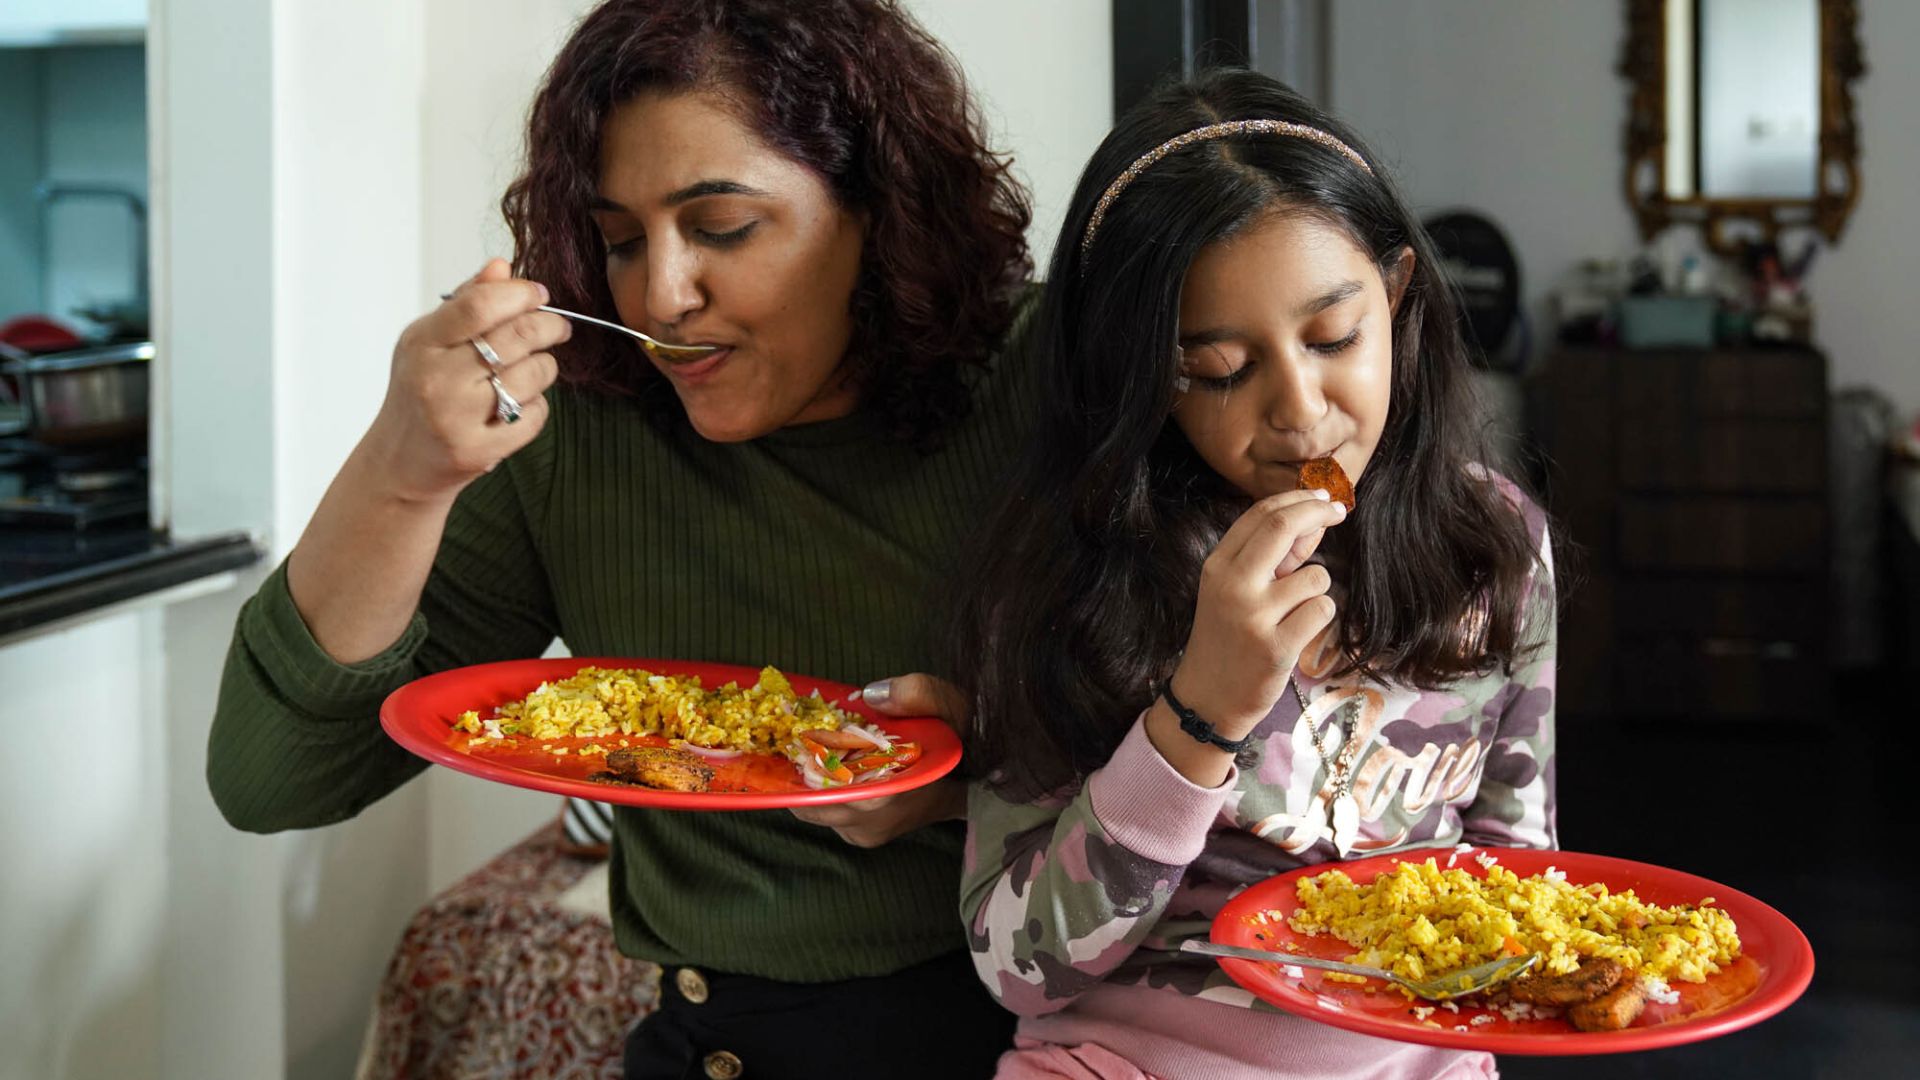 Khushboo sits with her daughter on her lap, each eating their meal out of a red plate